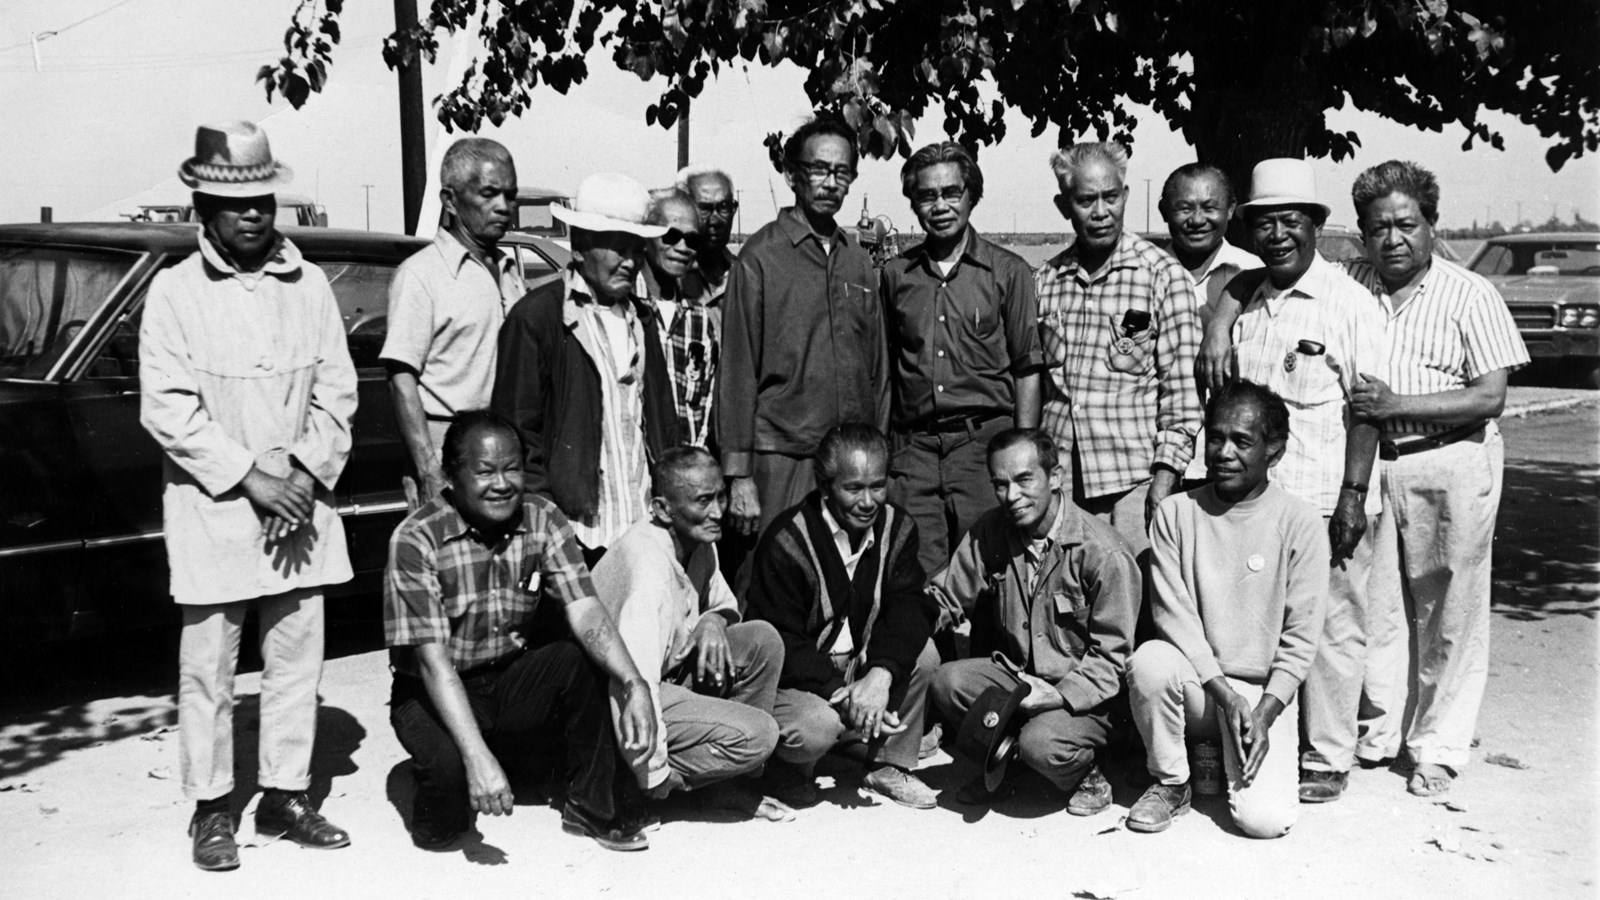 A black and white photo of a group of 16 men.